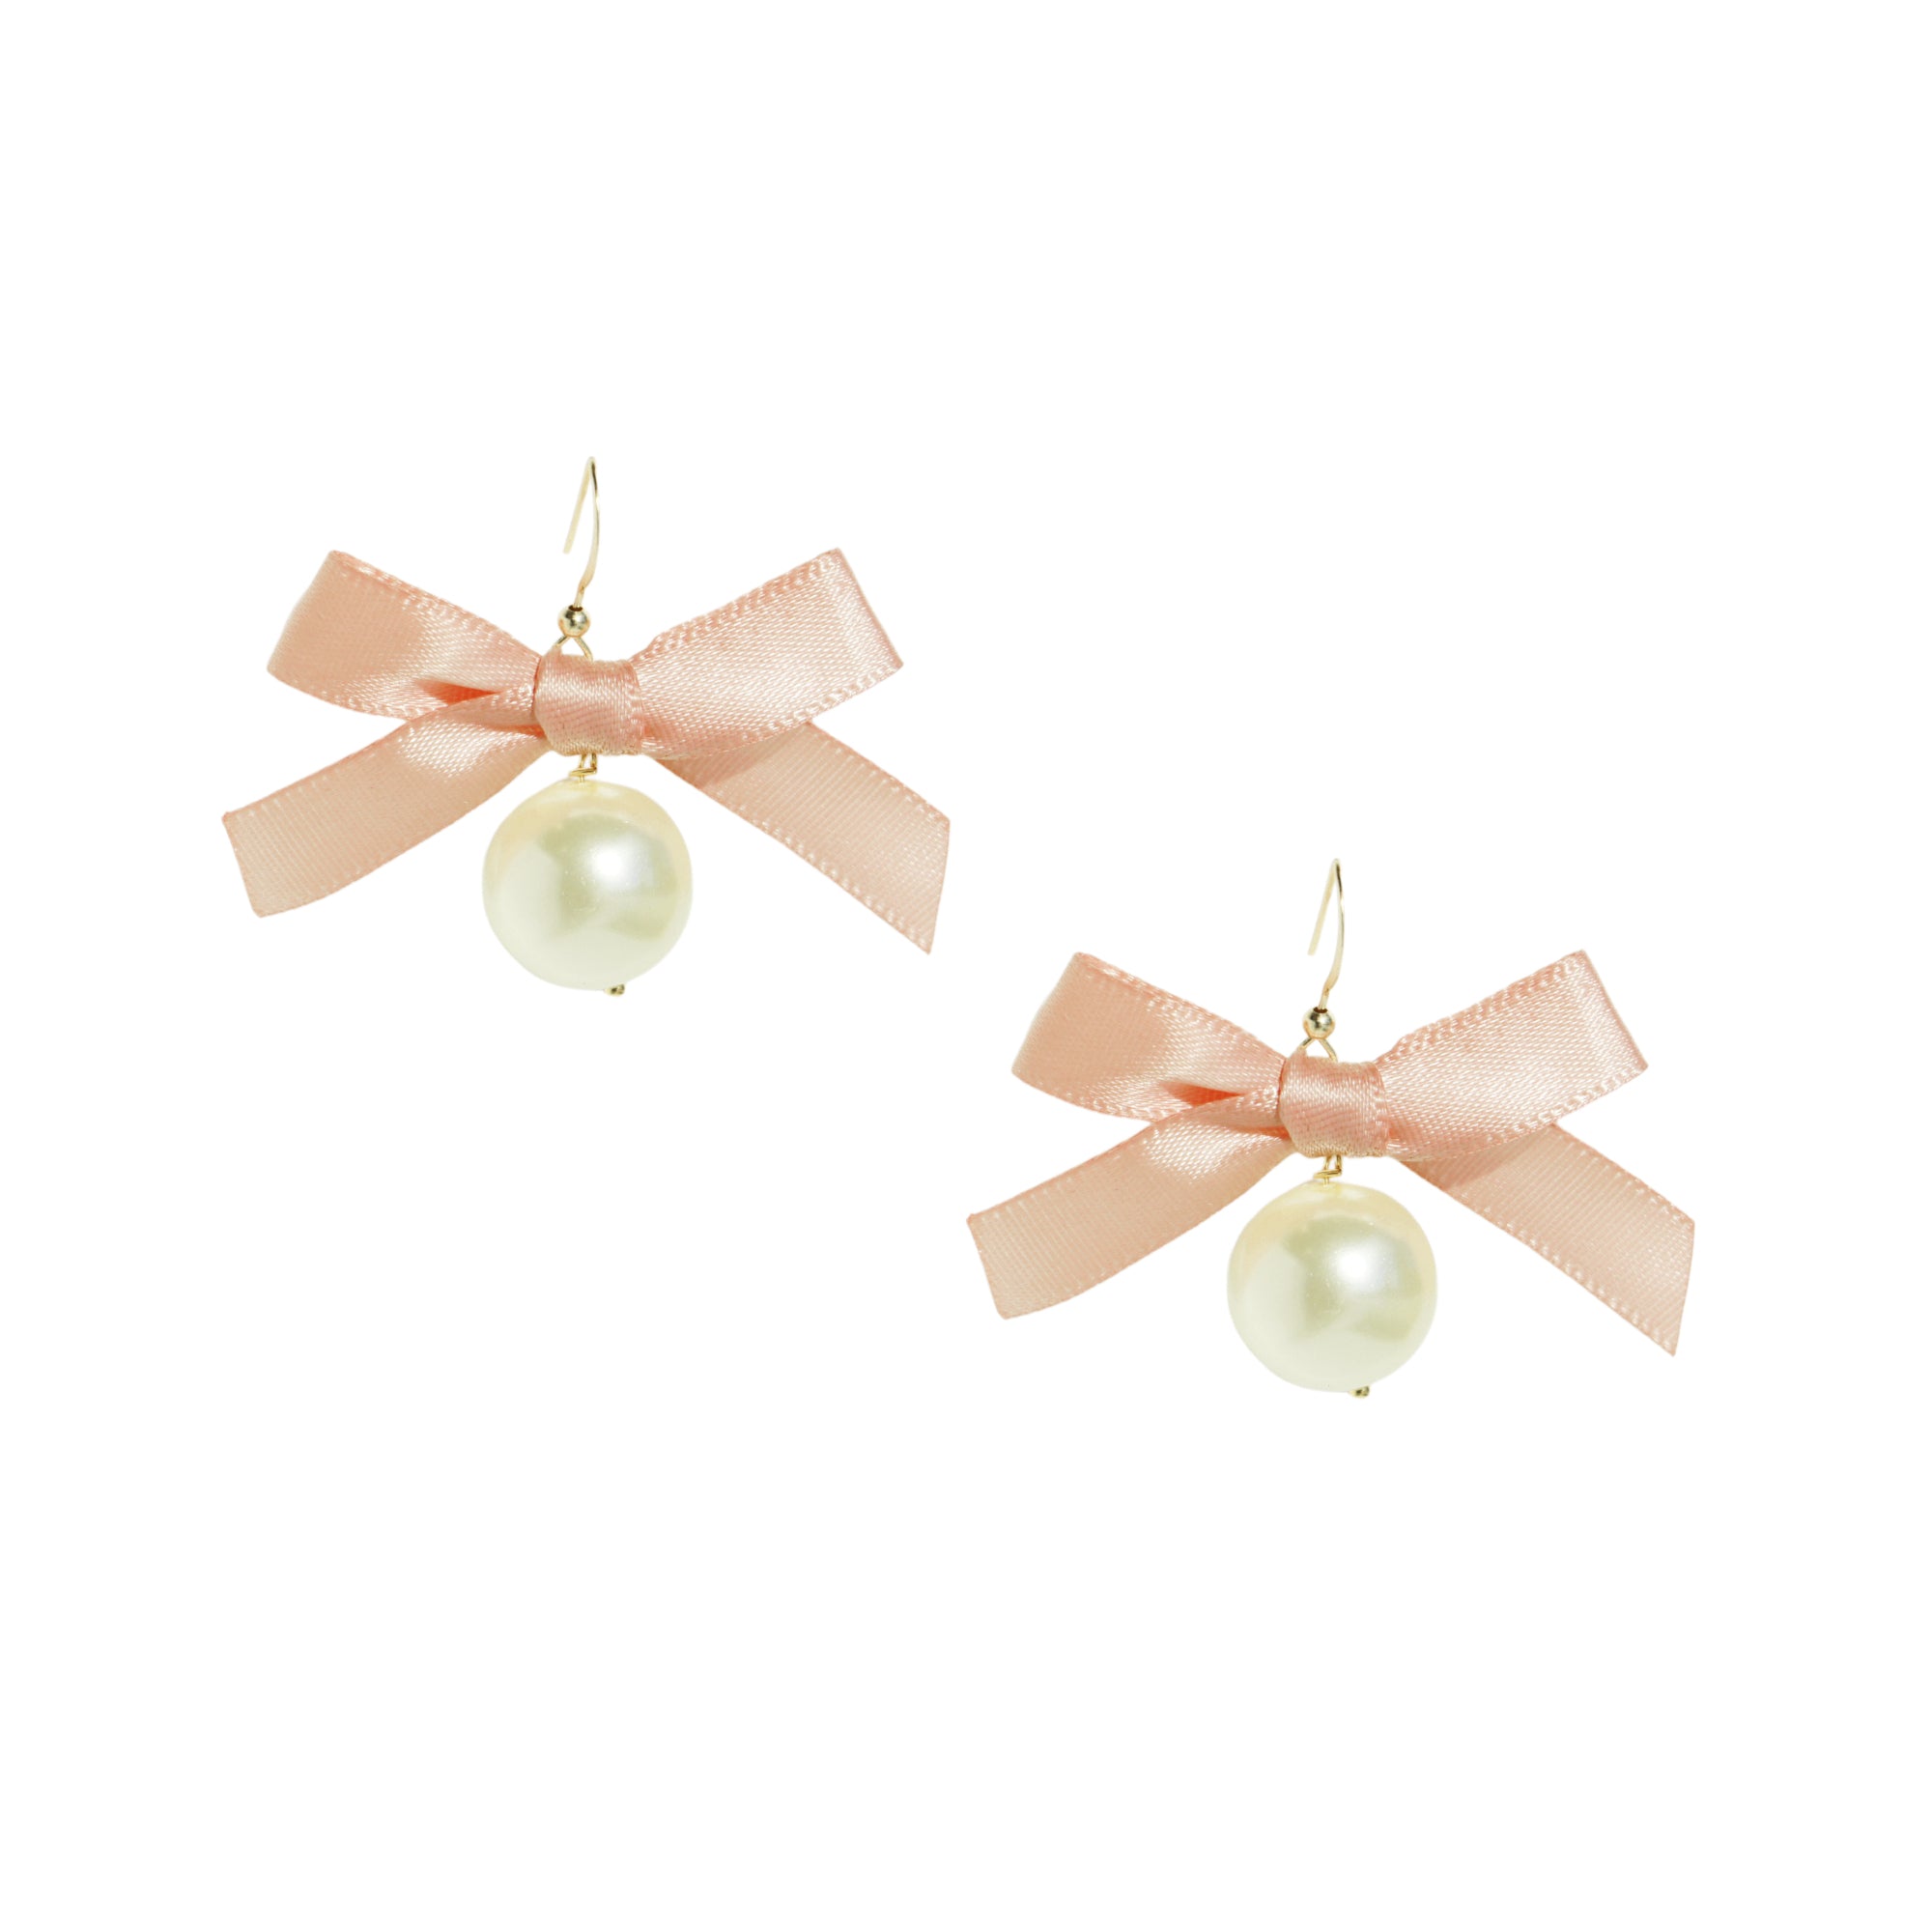 Ballerina Round Pearl Drop Earrings with Satin Ribbon Bow